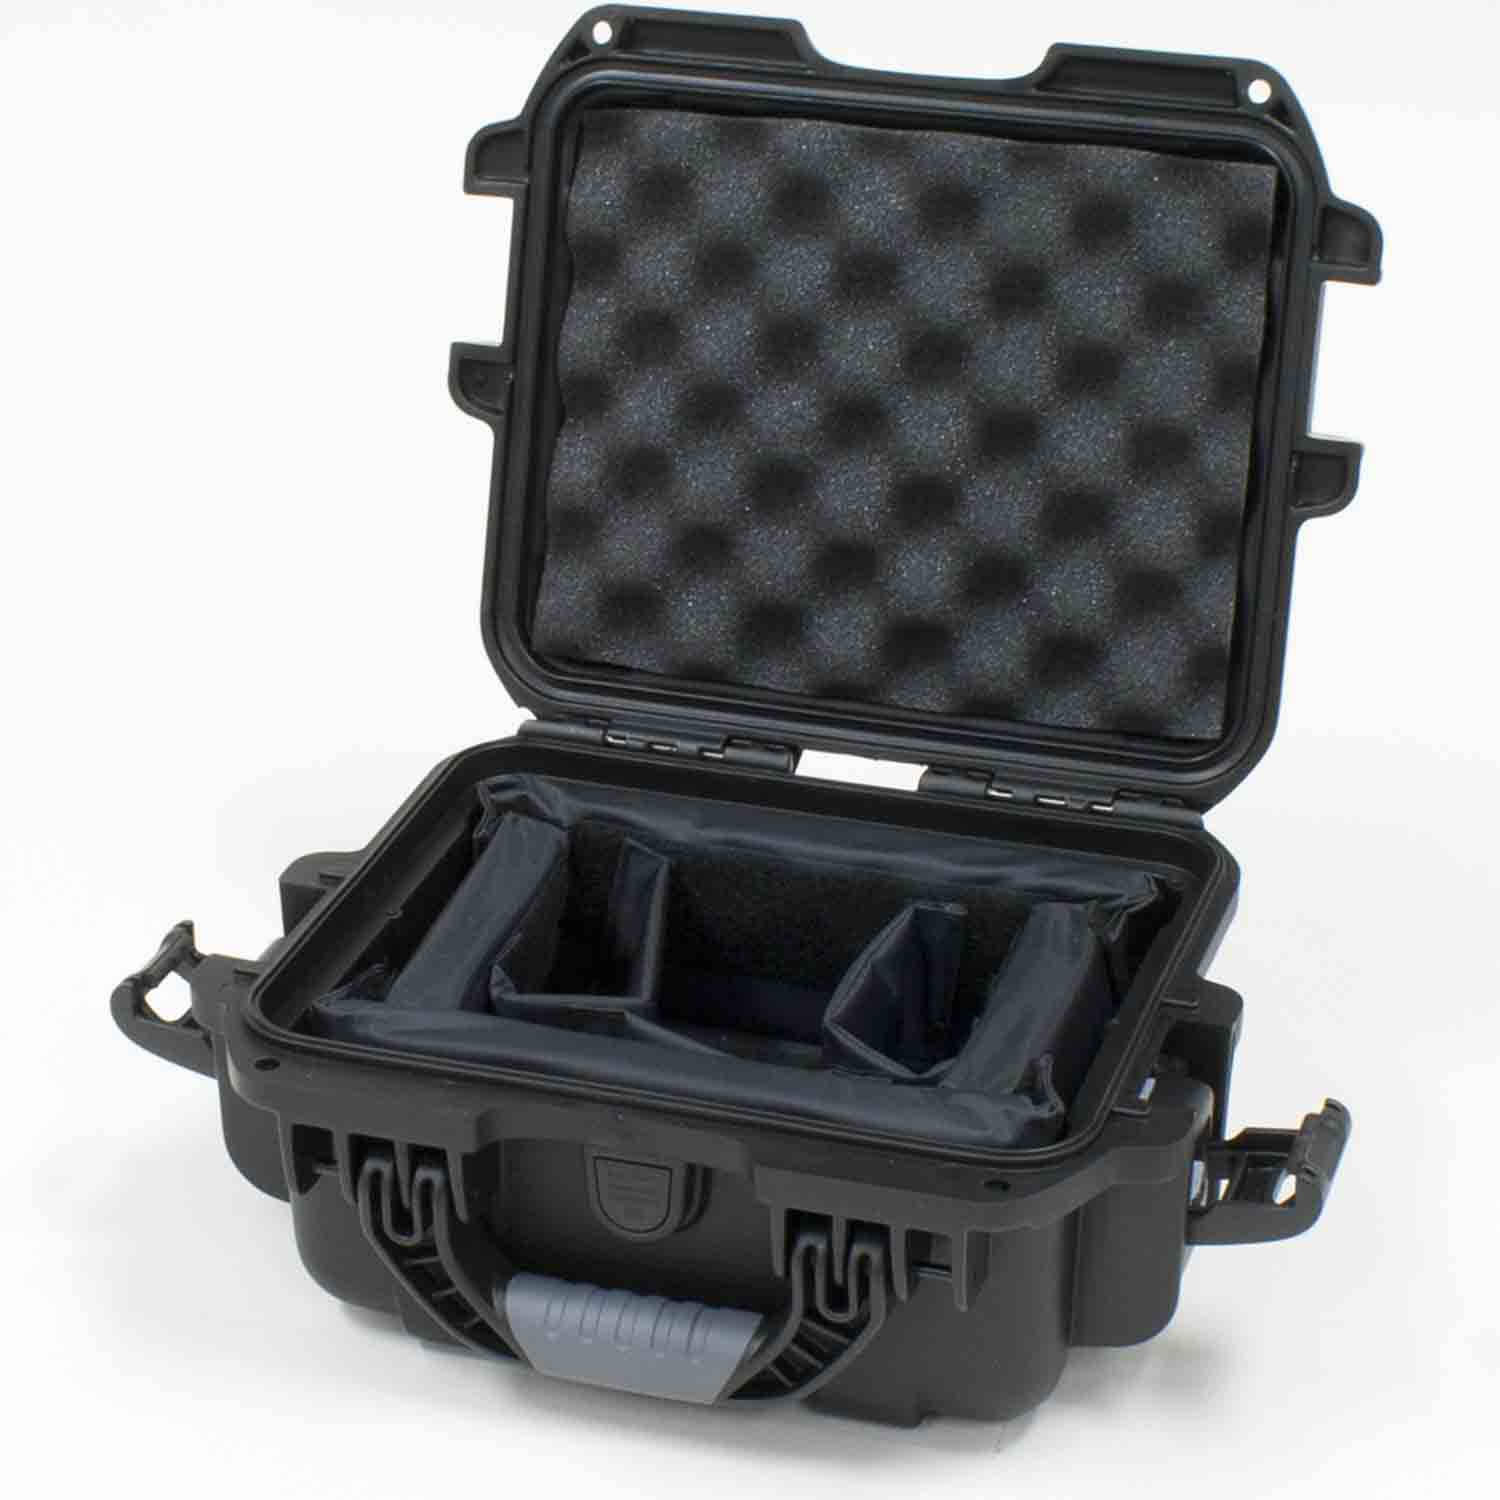 Gator Cases GU-0907-05-WPDV Waterproof Injection Molded Case with Divider System - 9.4″X7.4″X5.5″ - Hollywood DJ